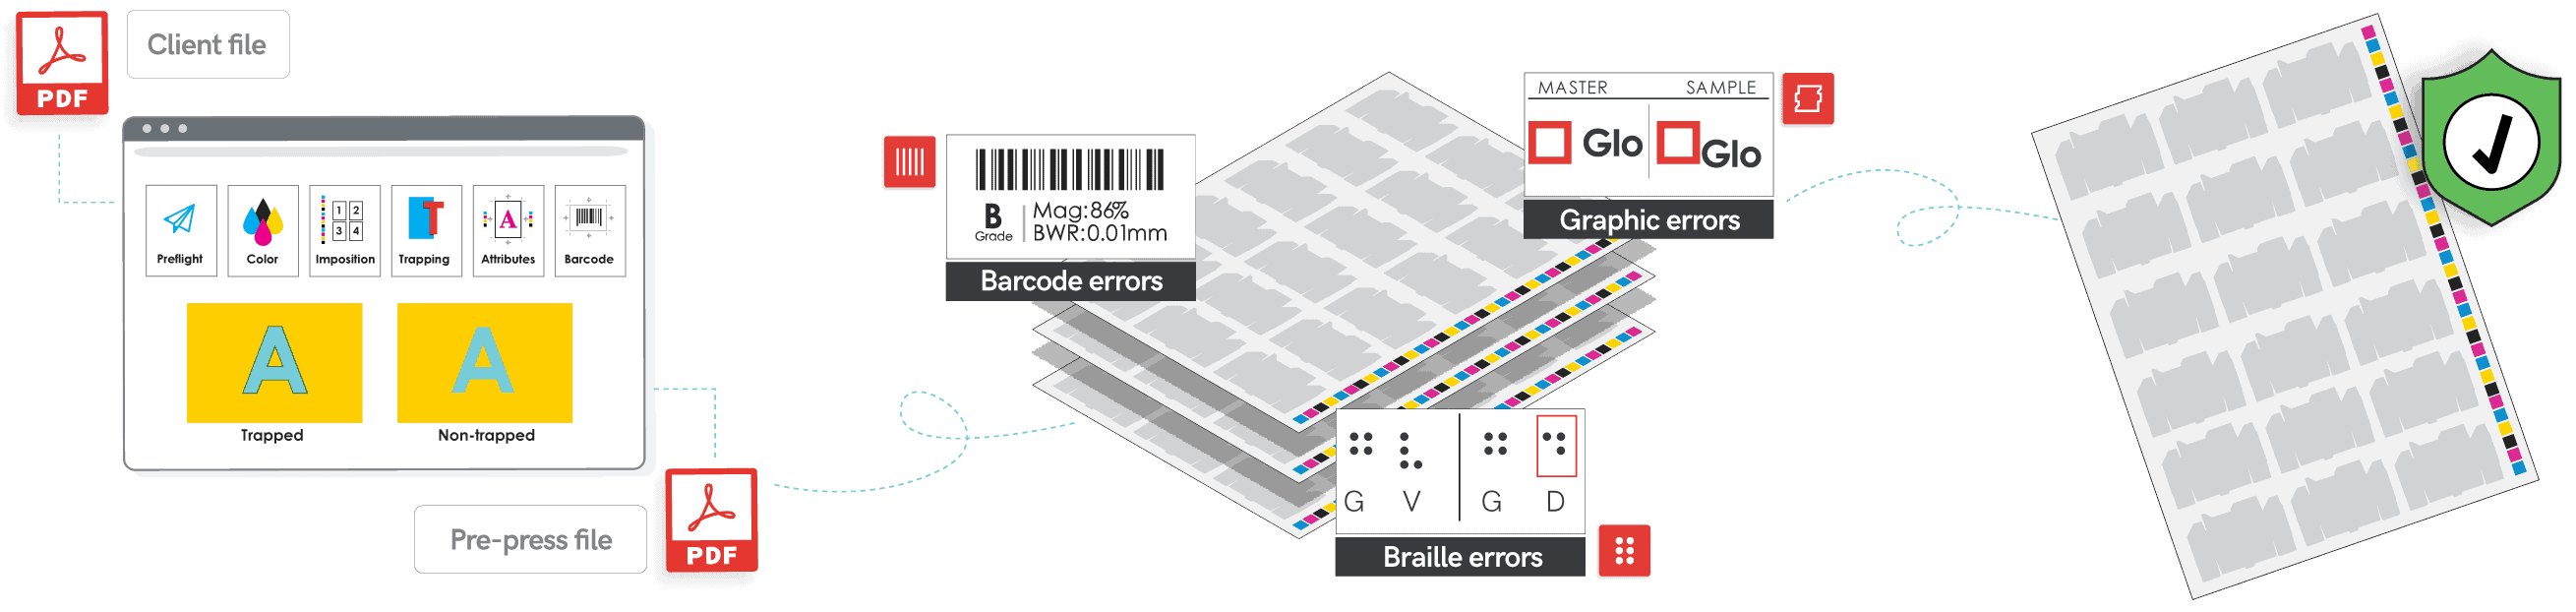 Braille inspection receiving B grade with table showing compatible mediums are labels, cartons, impositions, proofs, leaflets, nested artwork, revisions, and press sheets.